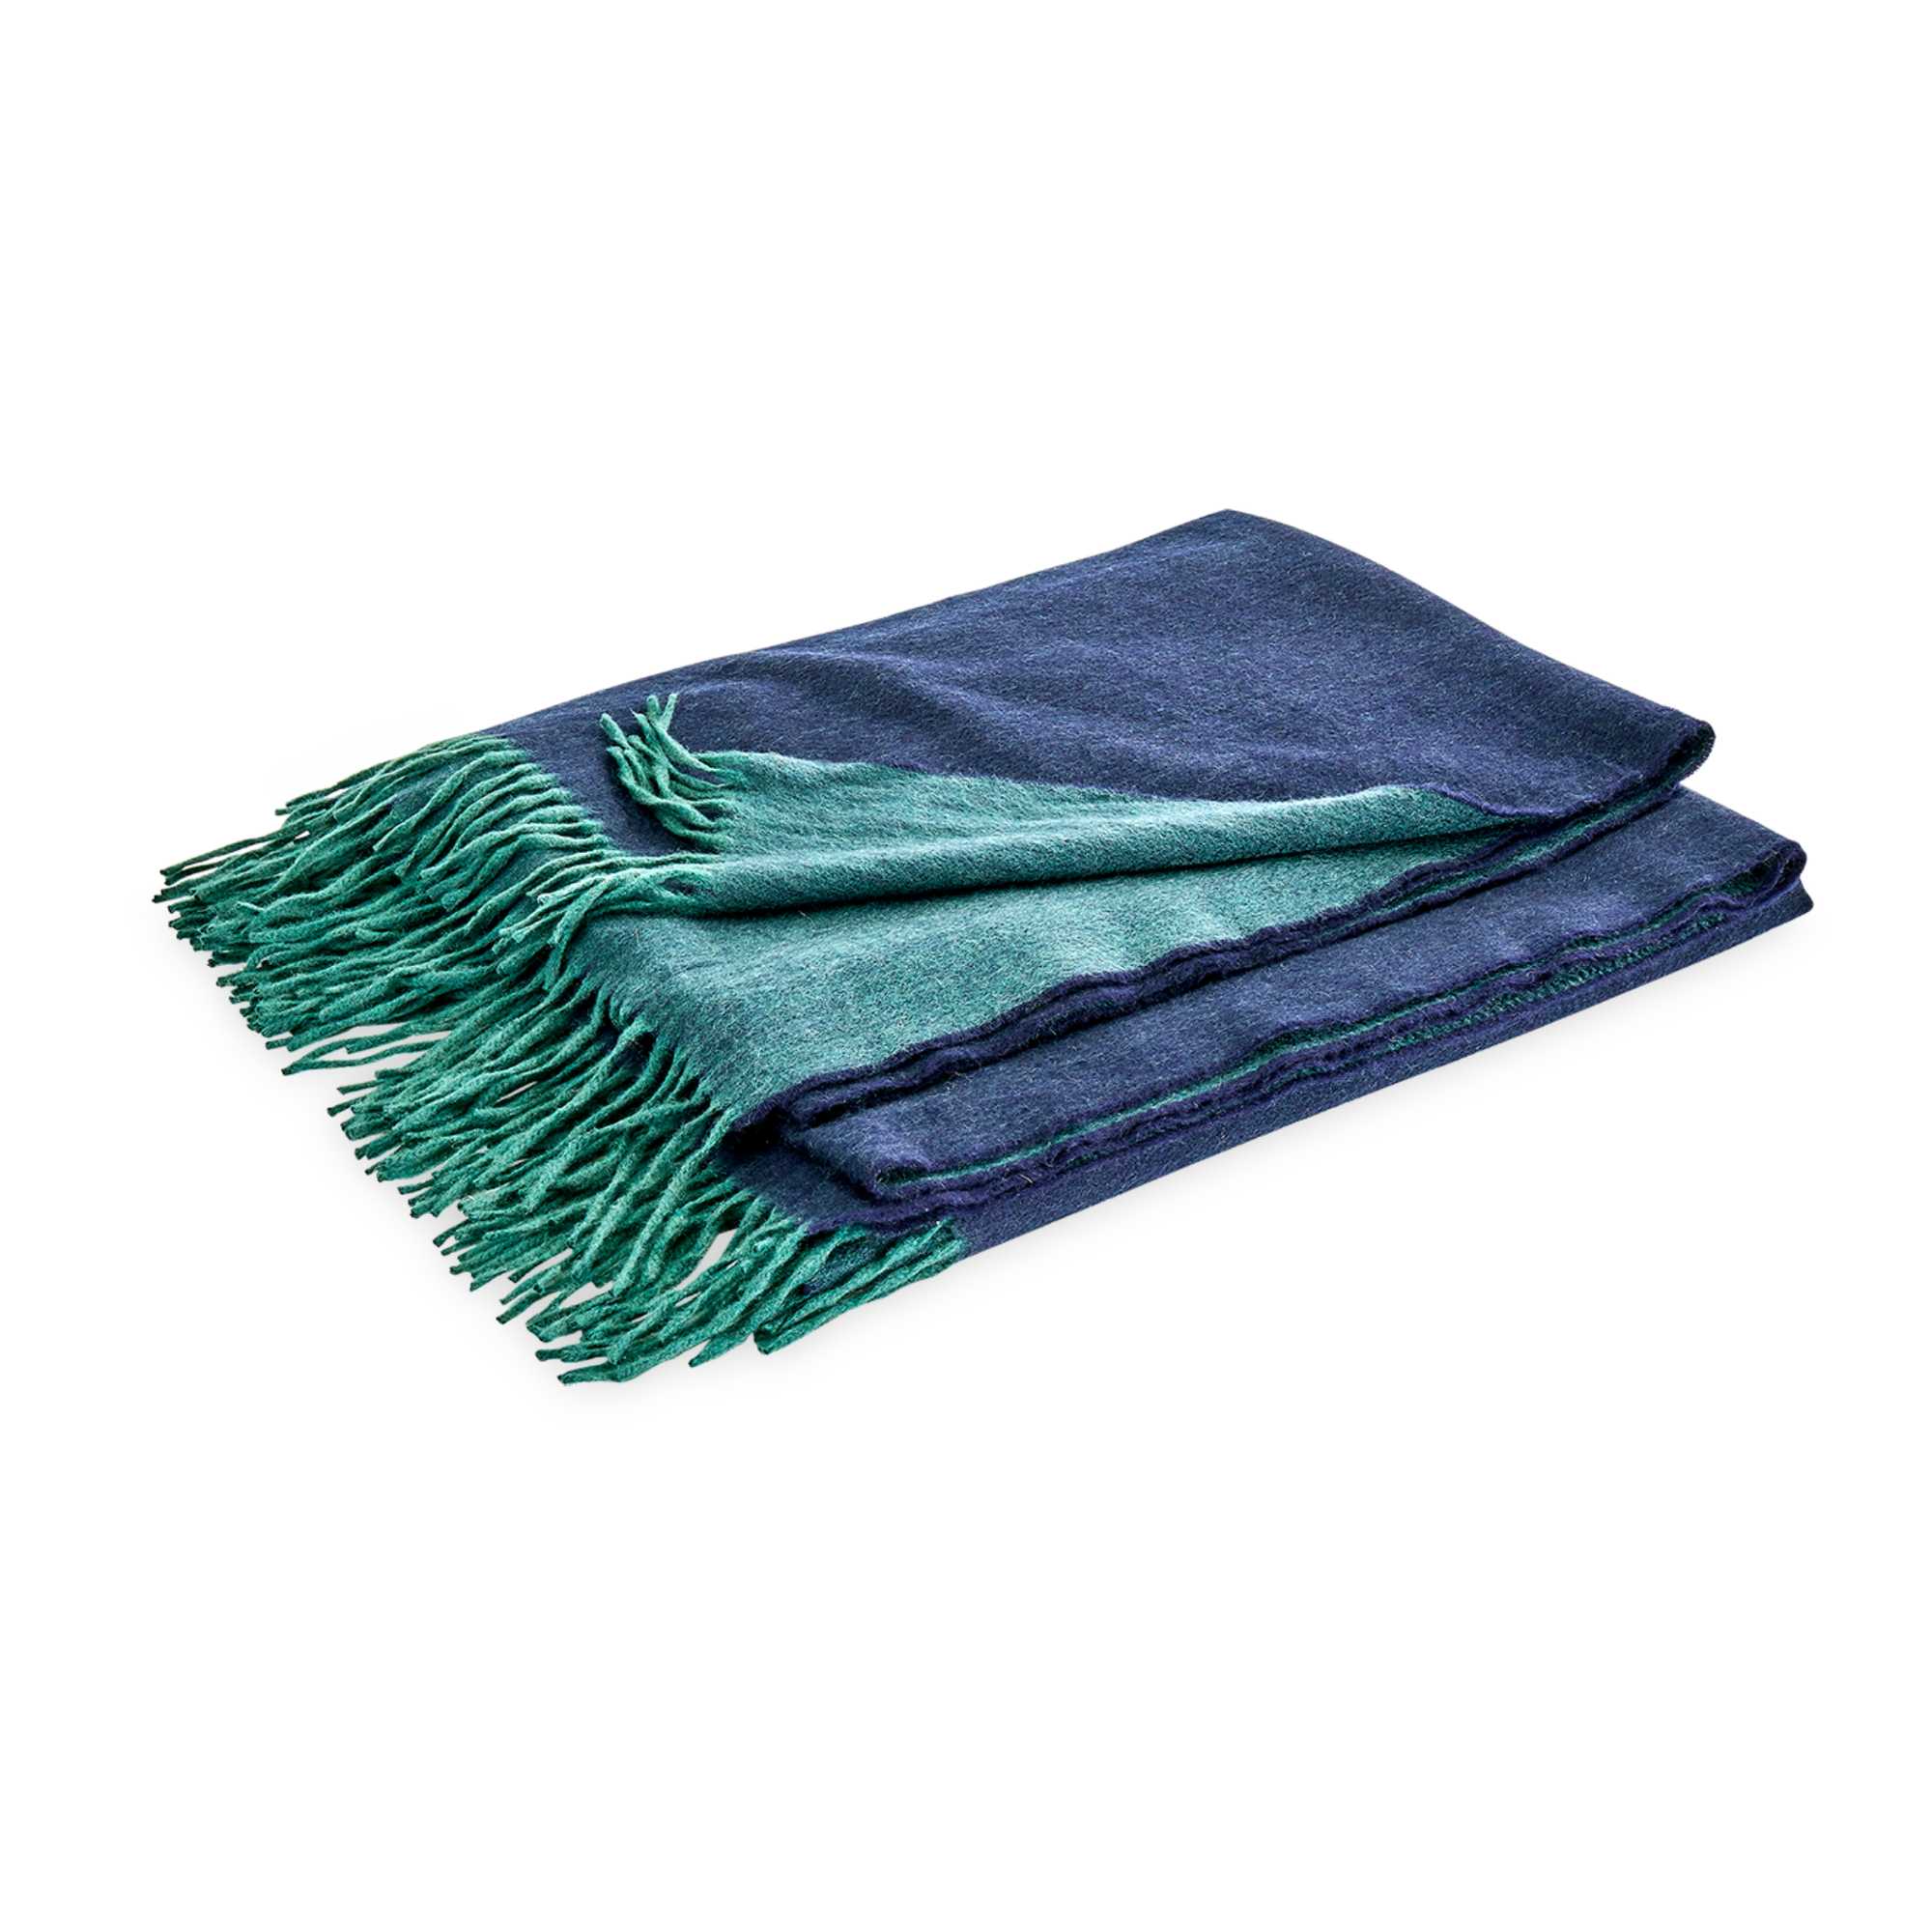 Folded Matouk Paley Throws in Jade and Navy Color